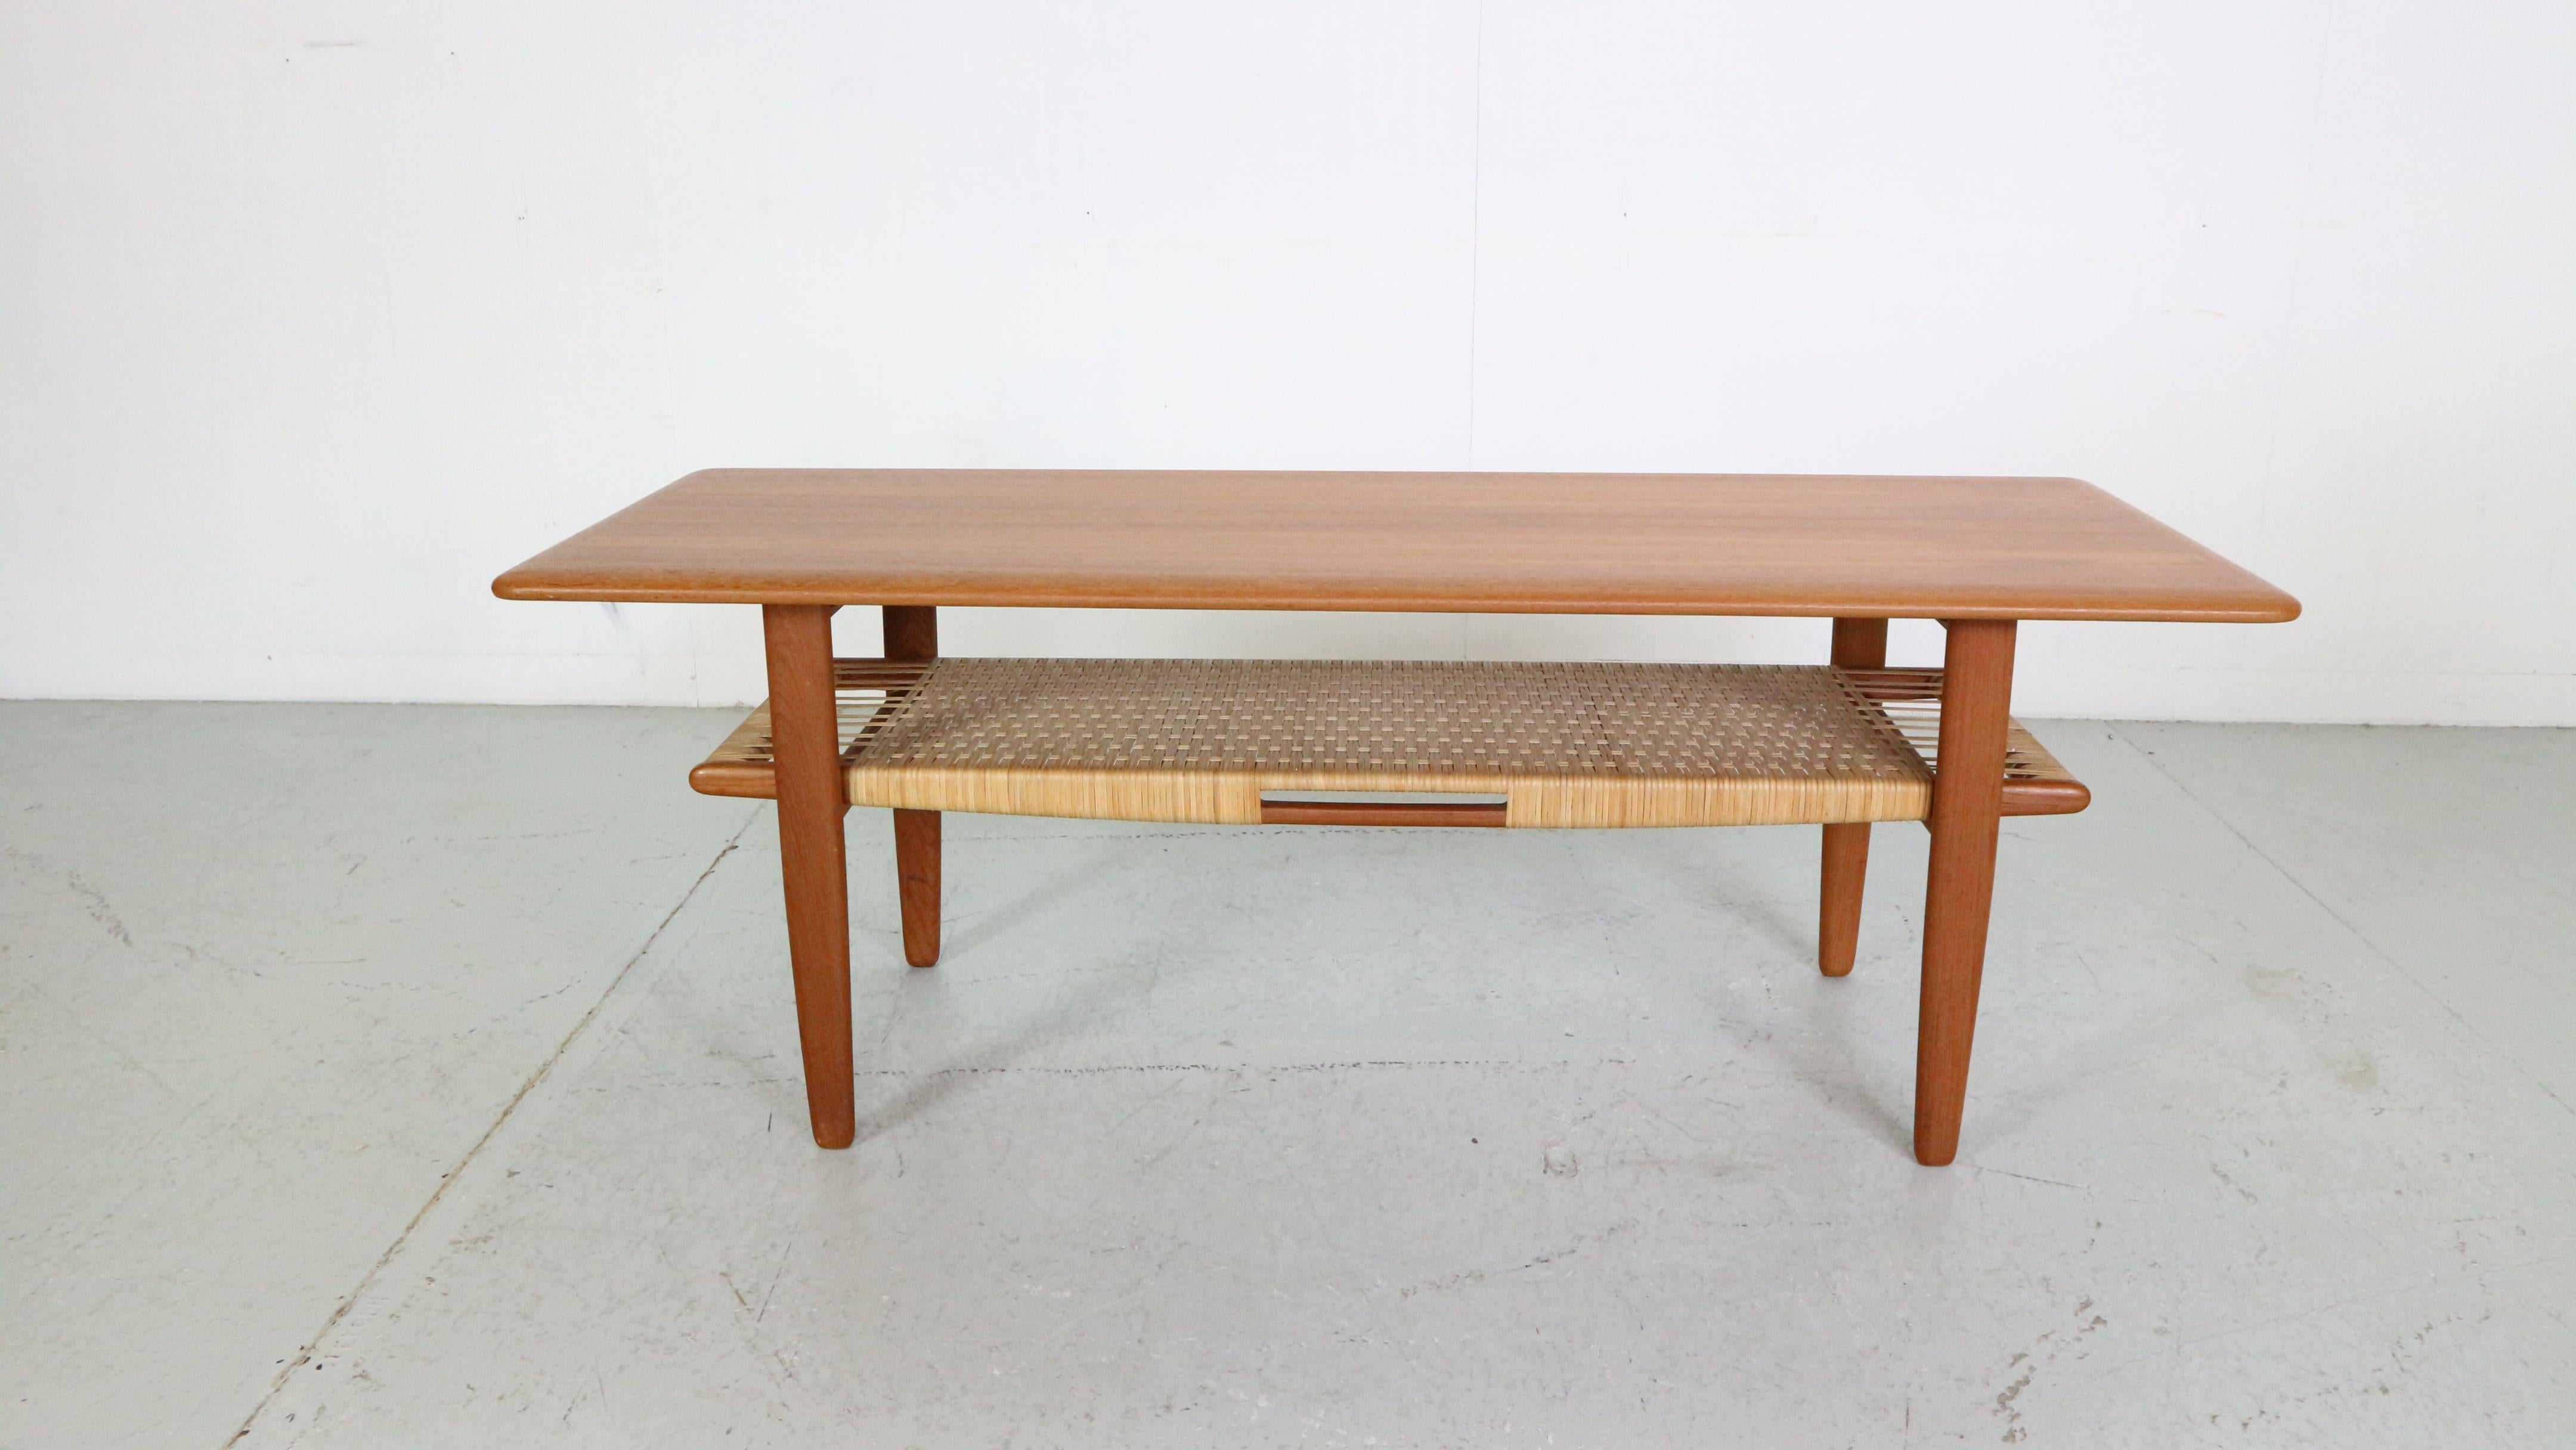 Mid- Century modern period coffee table designed by famous Danish furniture designer Kurt Østervig and manufactured by Jason Møbler in Denmark in the 1950s. 

The table features beautiful rounded table top corners and a ratan storage shelf for